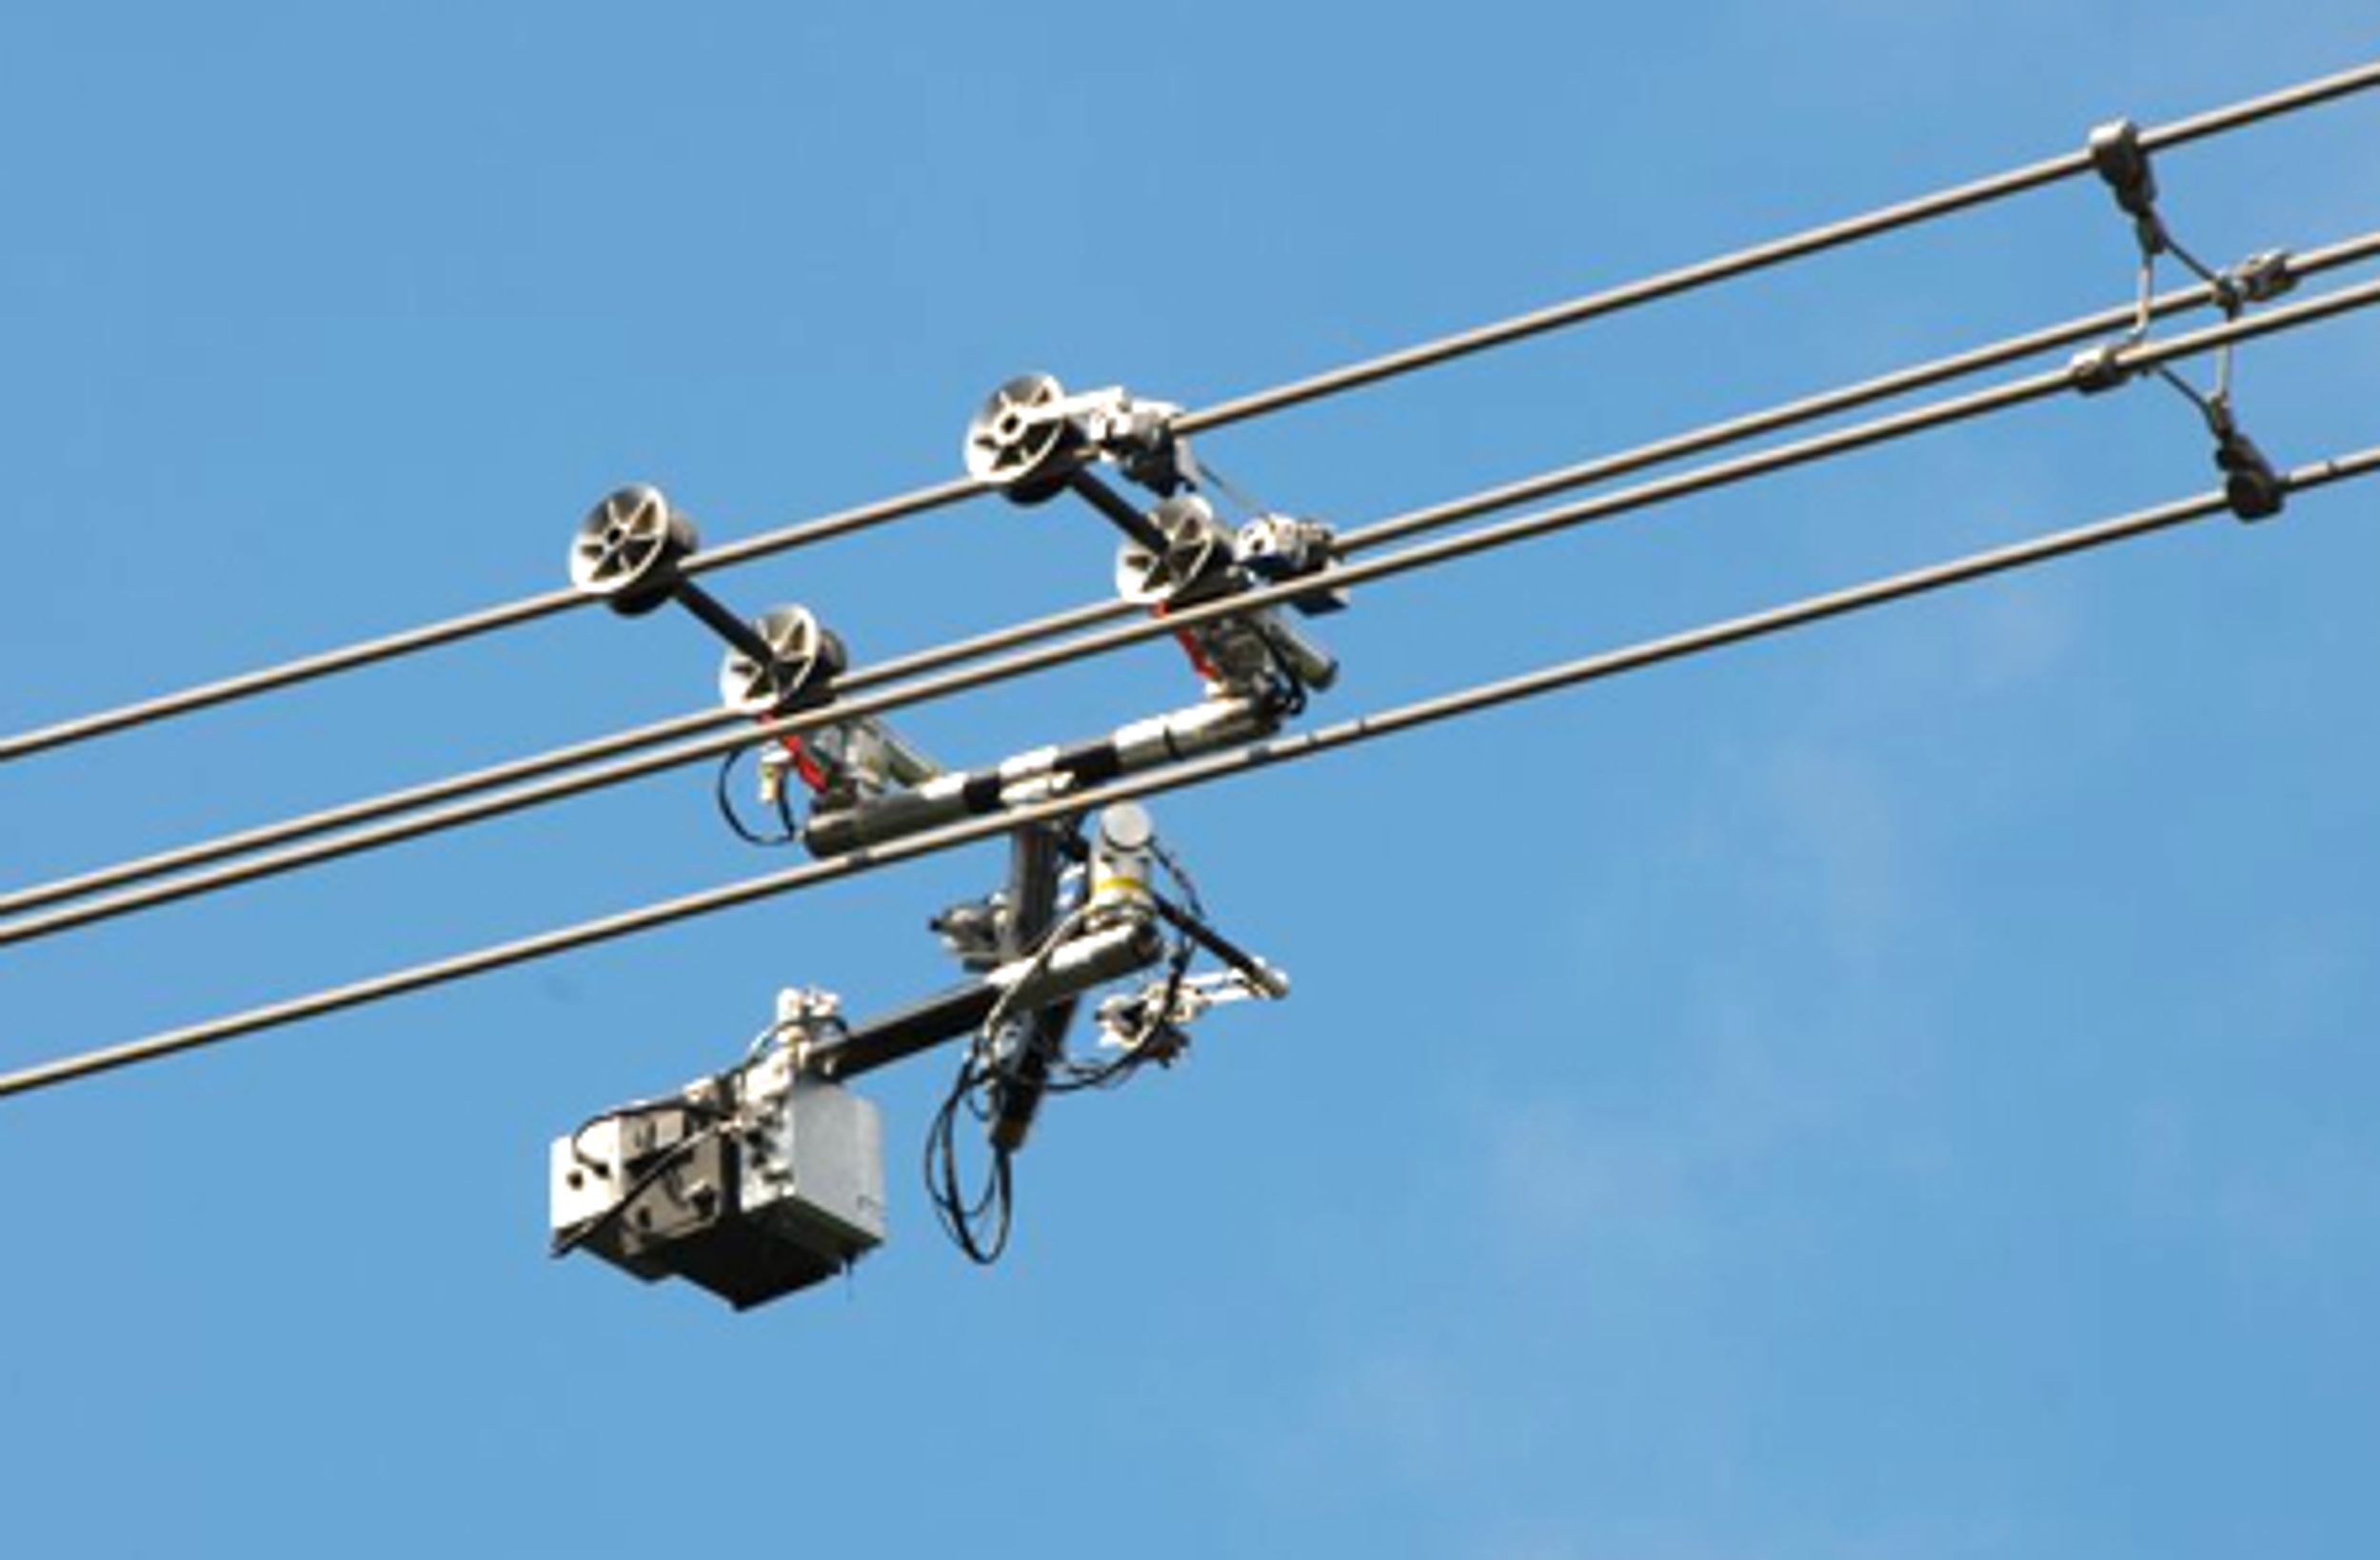 Watch This Robot Crawl on a High-Voltage Power Line